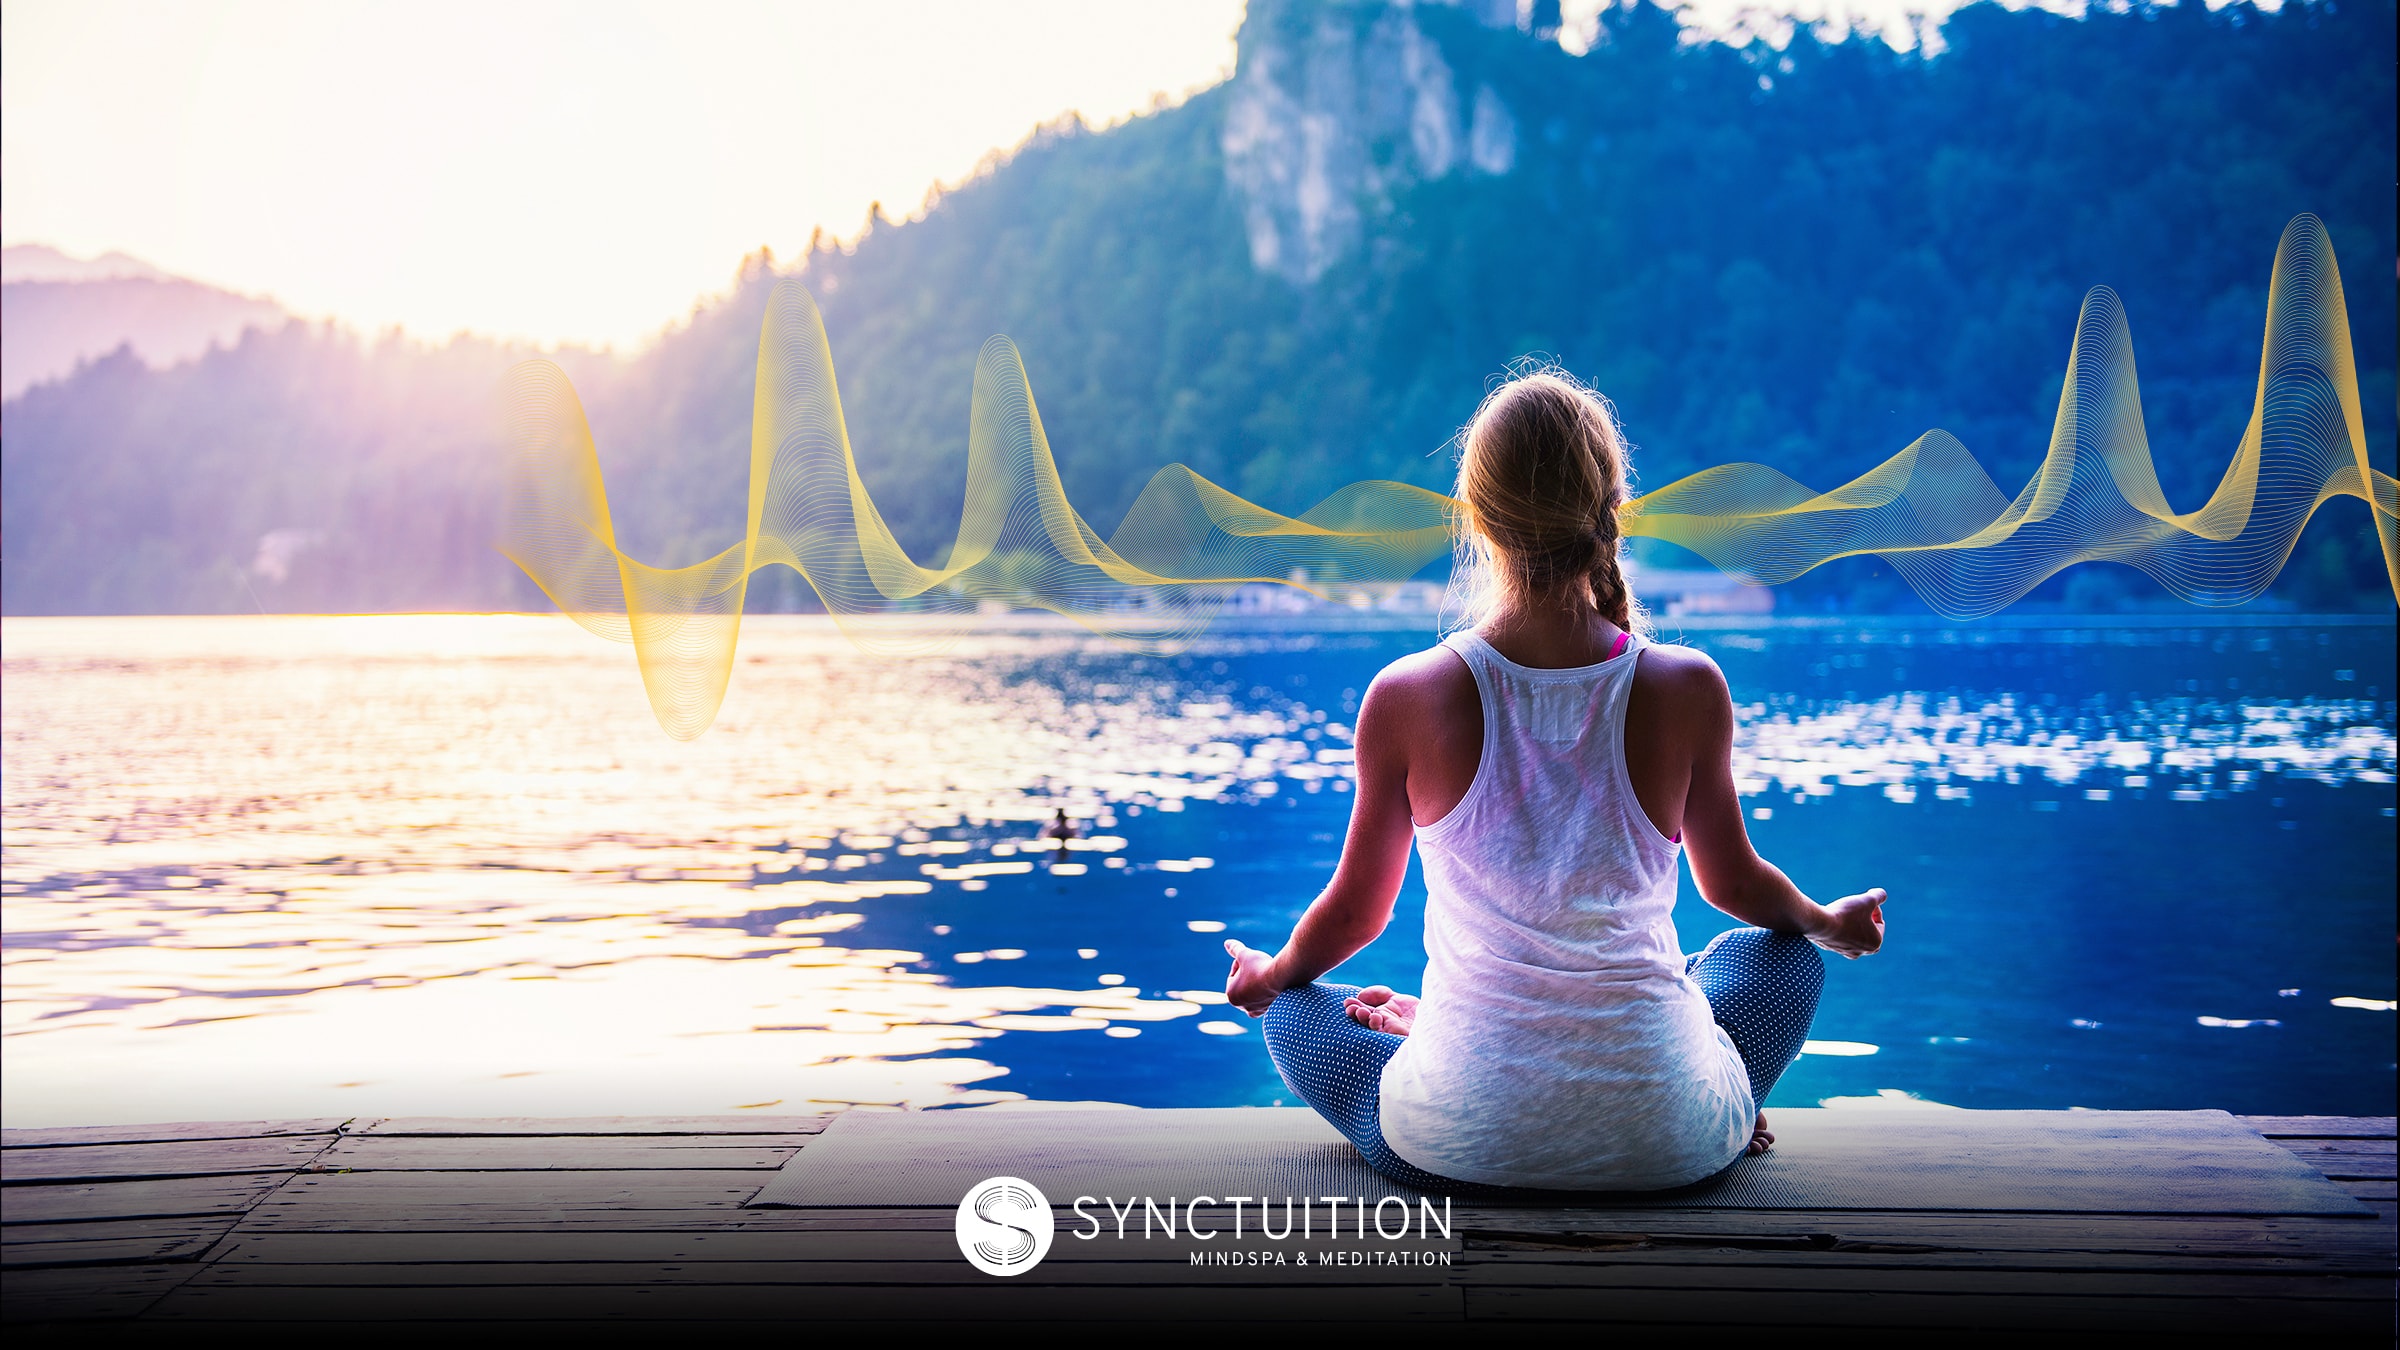 Wondering how to rewire your brain? Try meditation!